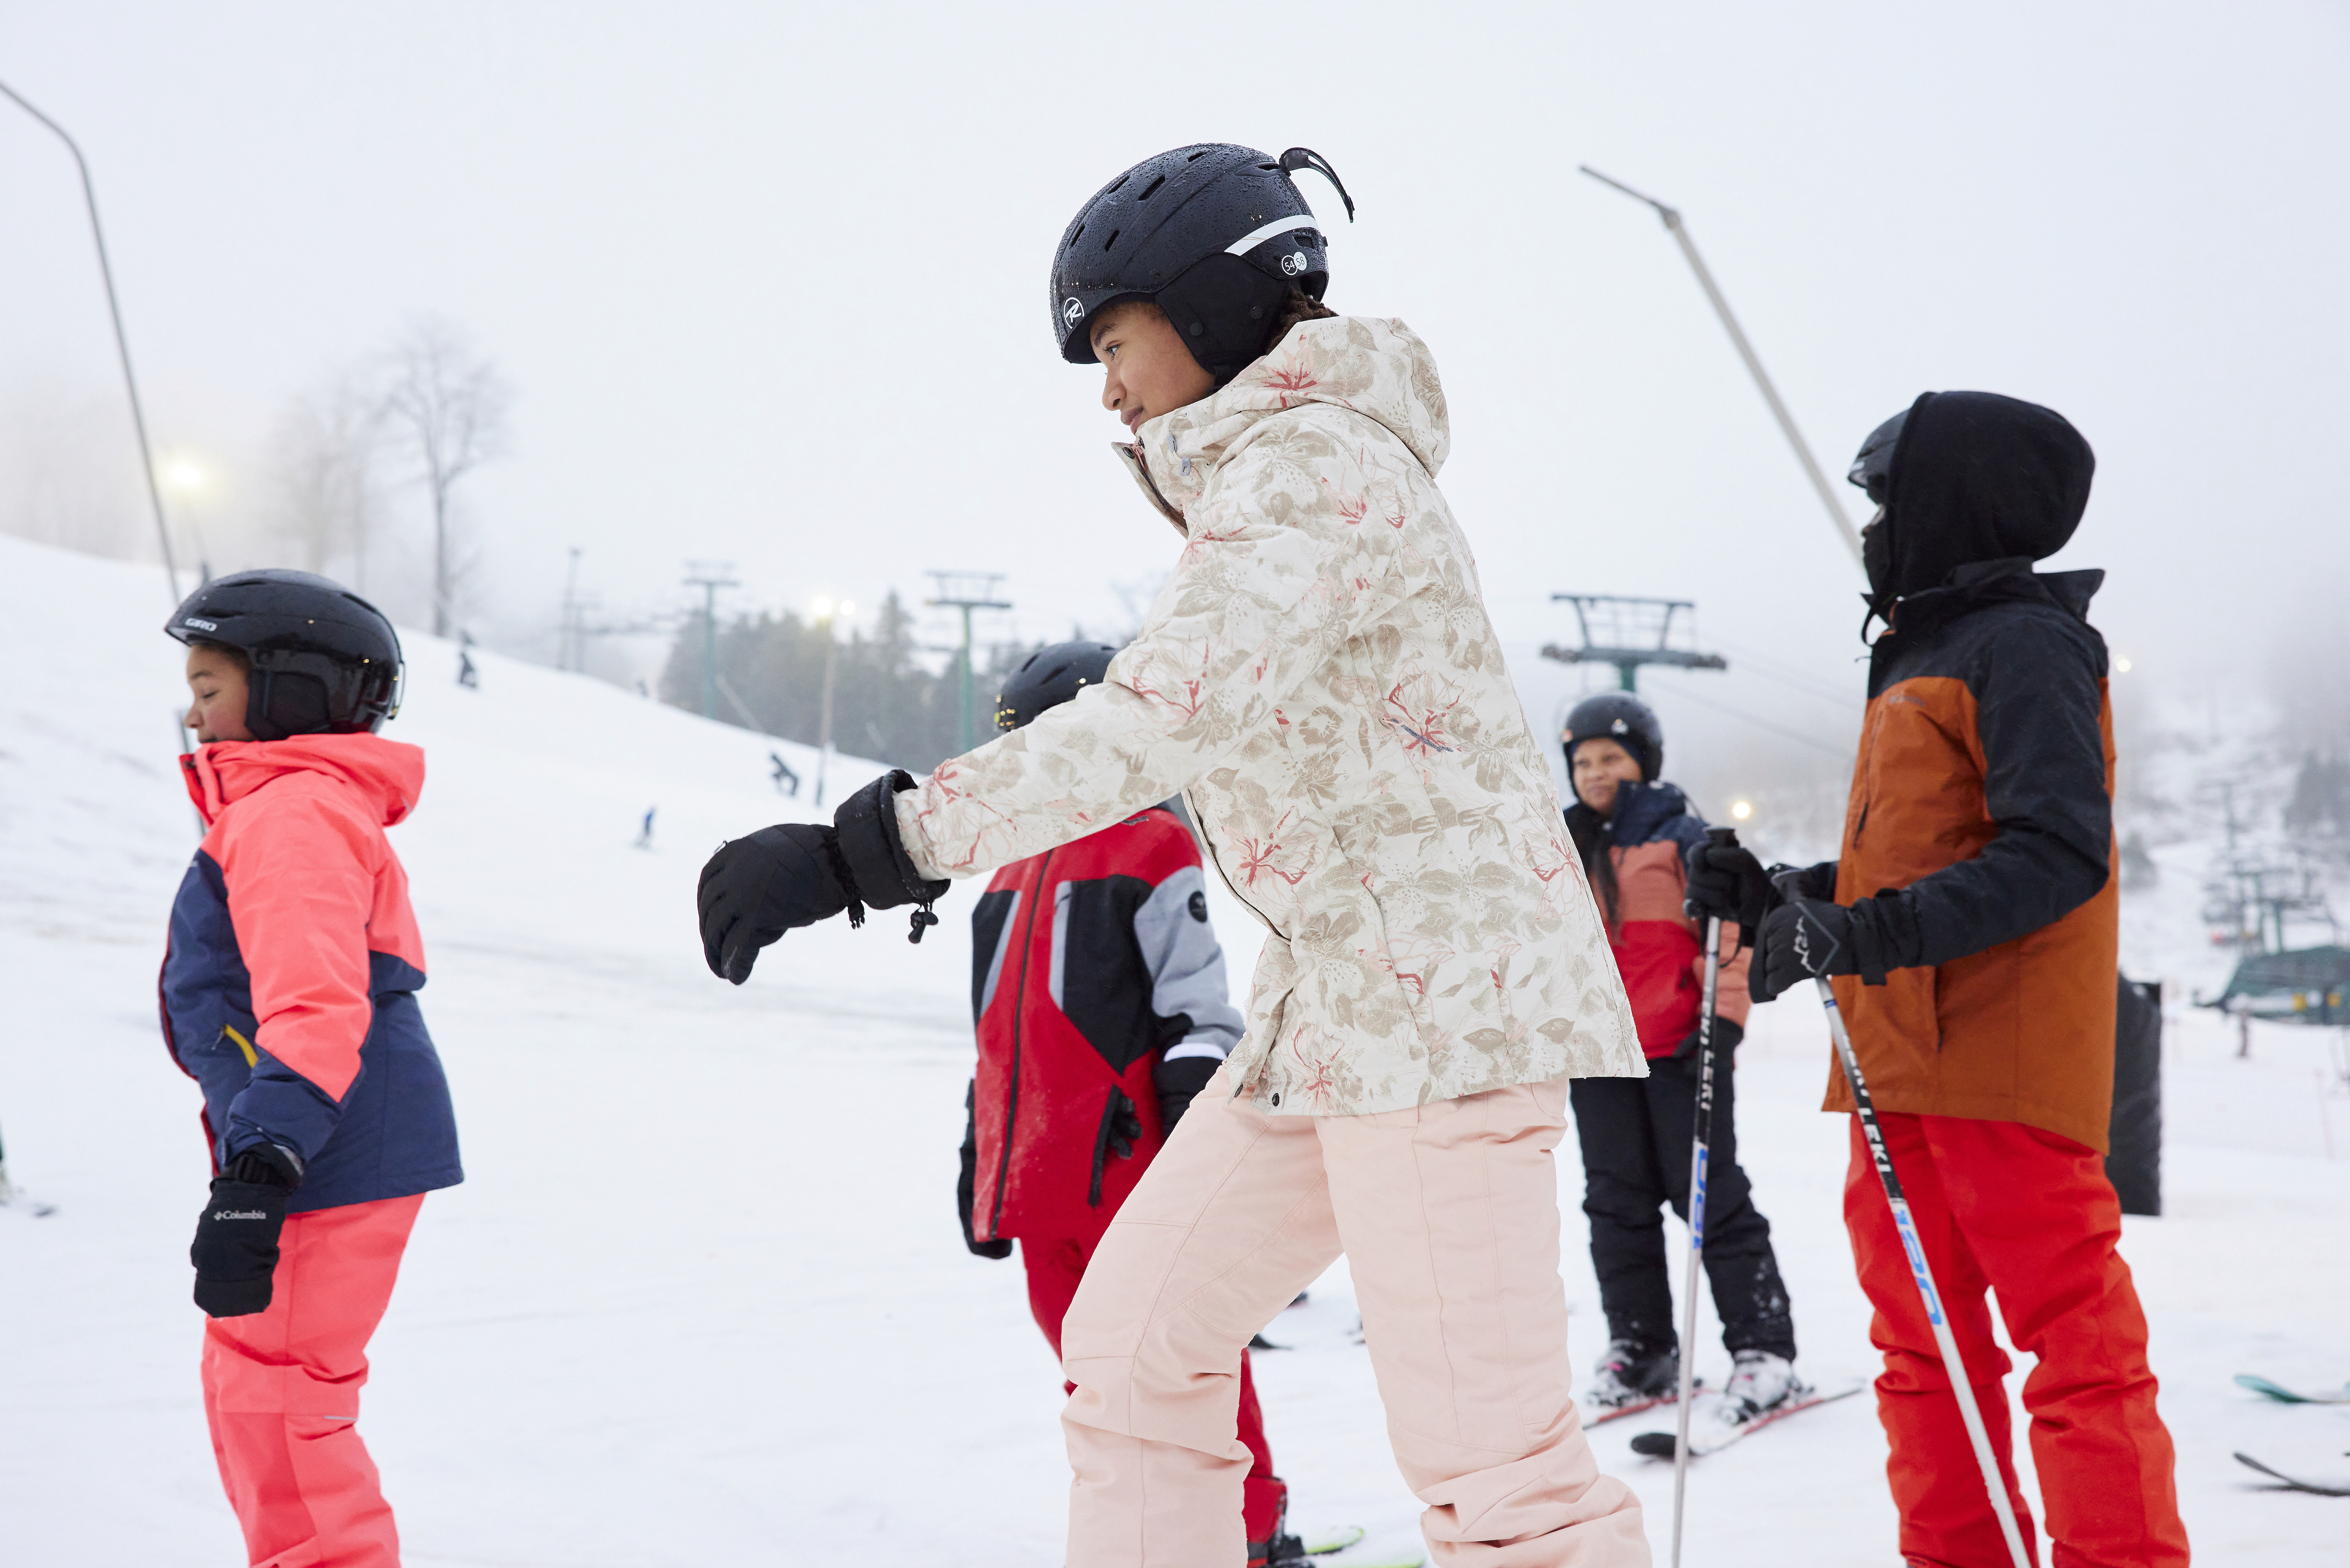 A group of young people stand in the snow ready to ski and snowboard